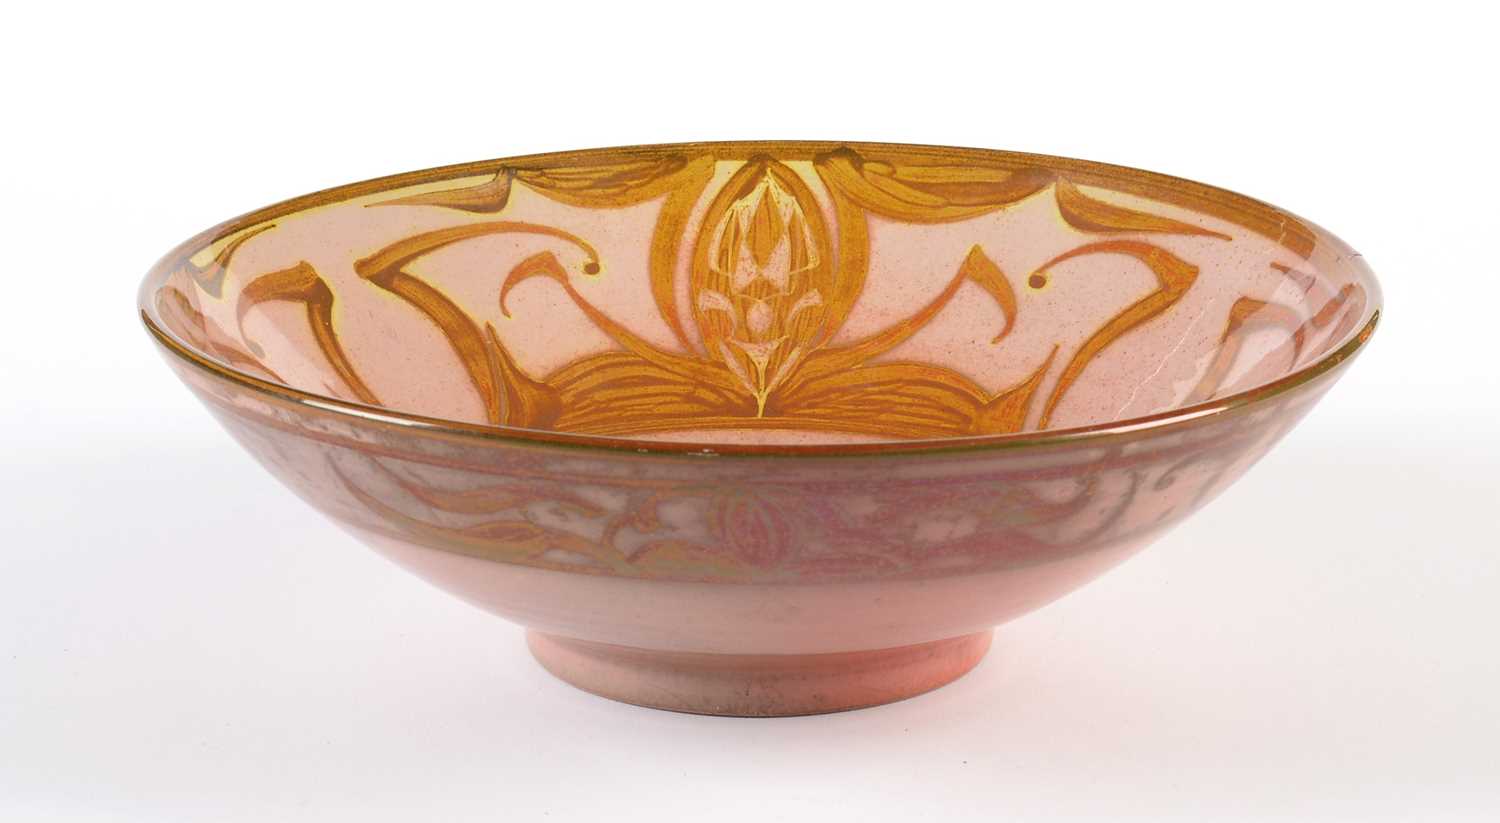 Lot 706 - A modern Lustre Bowl by Alan Caiger-Smith MBE